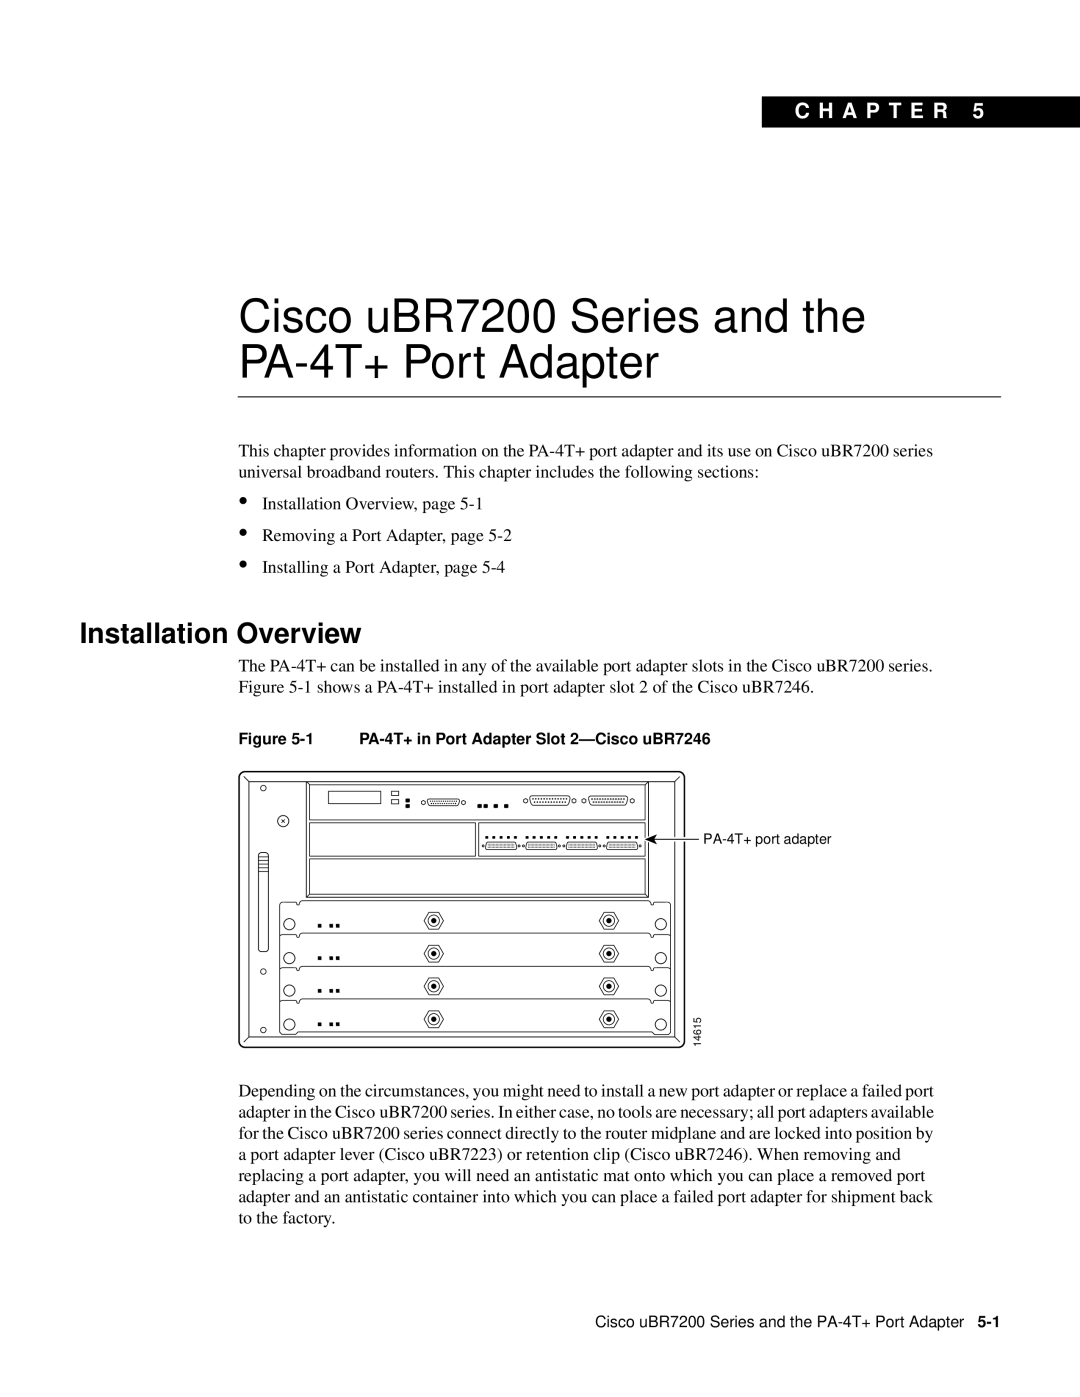 Cisco Systems manual Cisco uBR7200 Series and the PA-4T+ Port Adapter, Installation Overview, C H A P T E R 